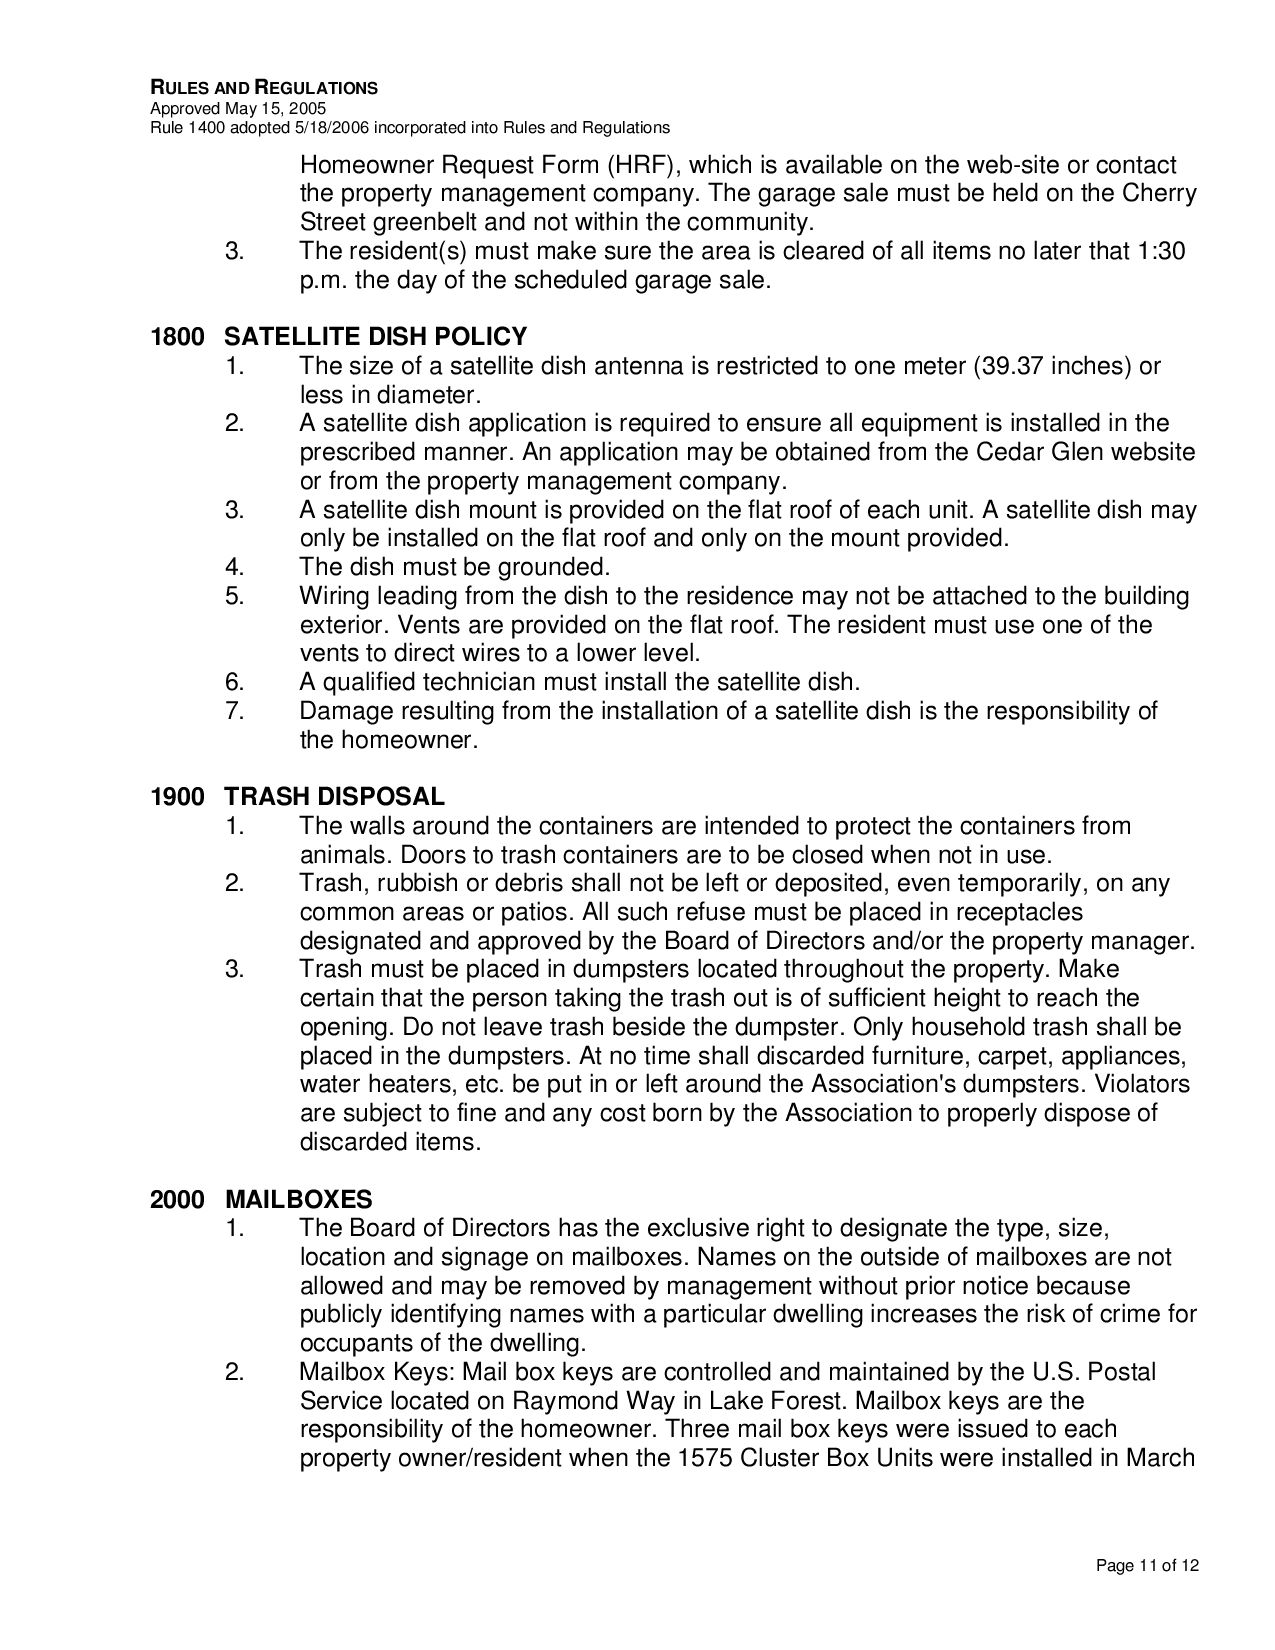 Page 11 of the HOA Rules and Regulations